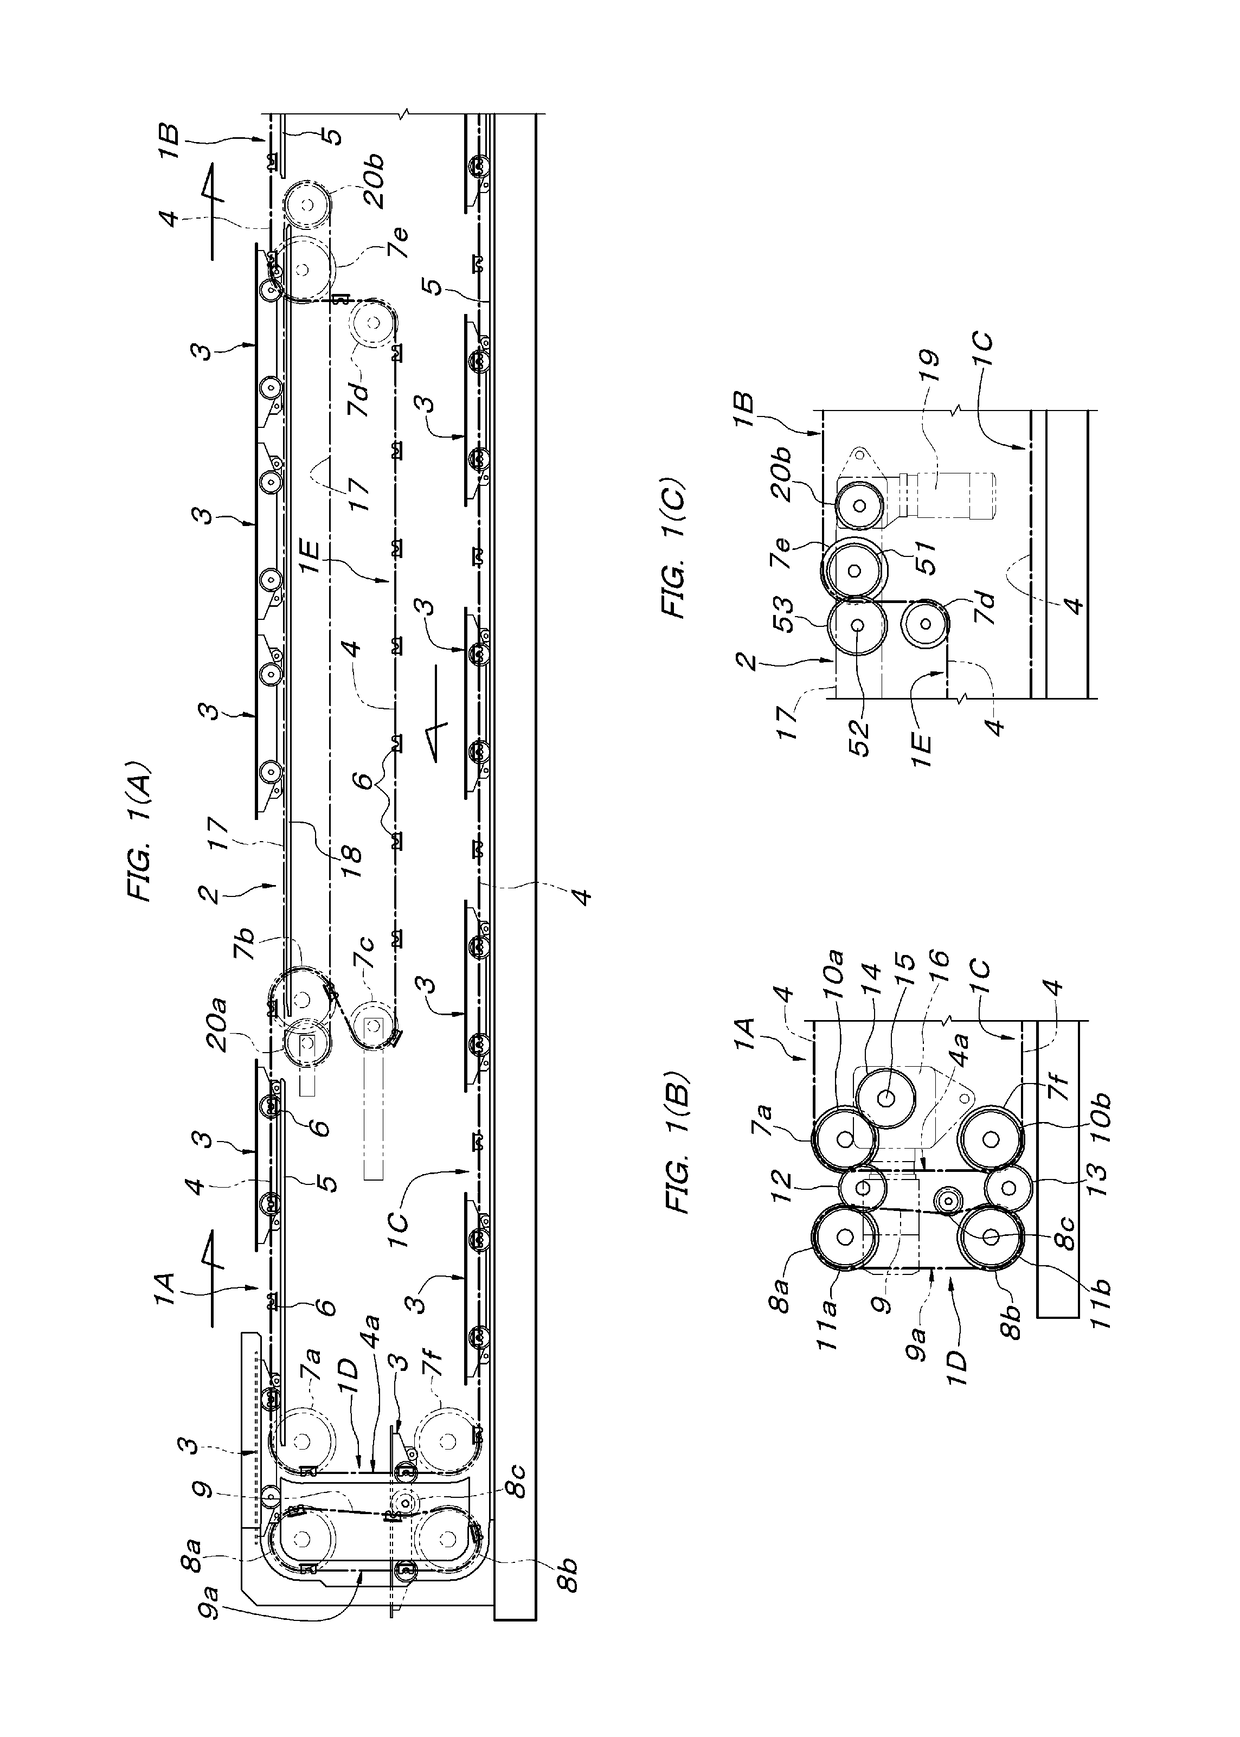 Conveyance Device Using Carriage